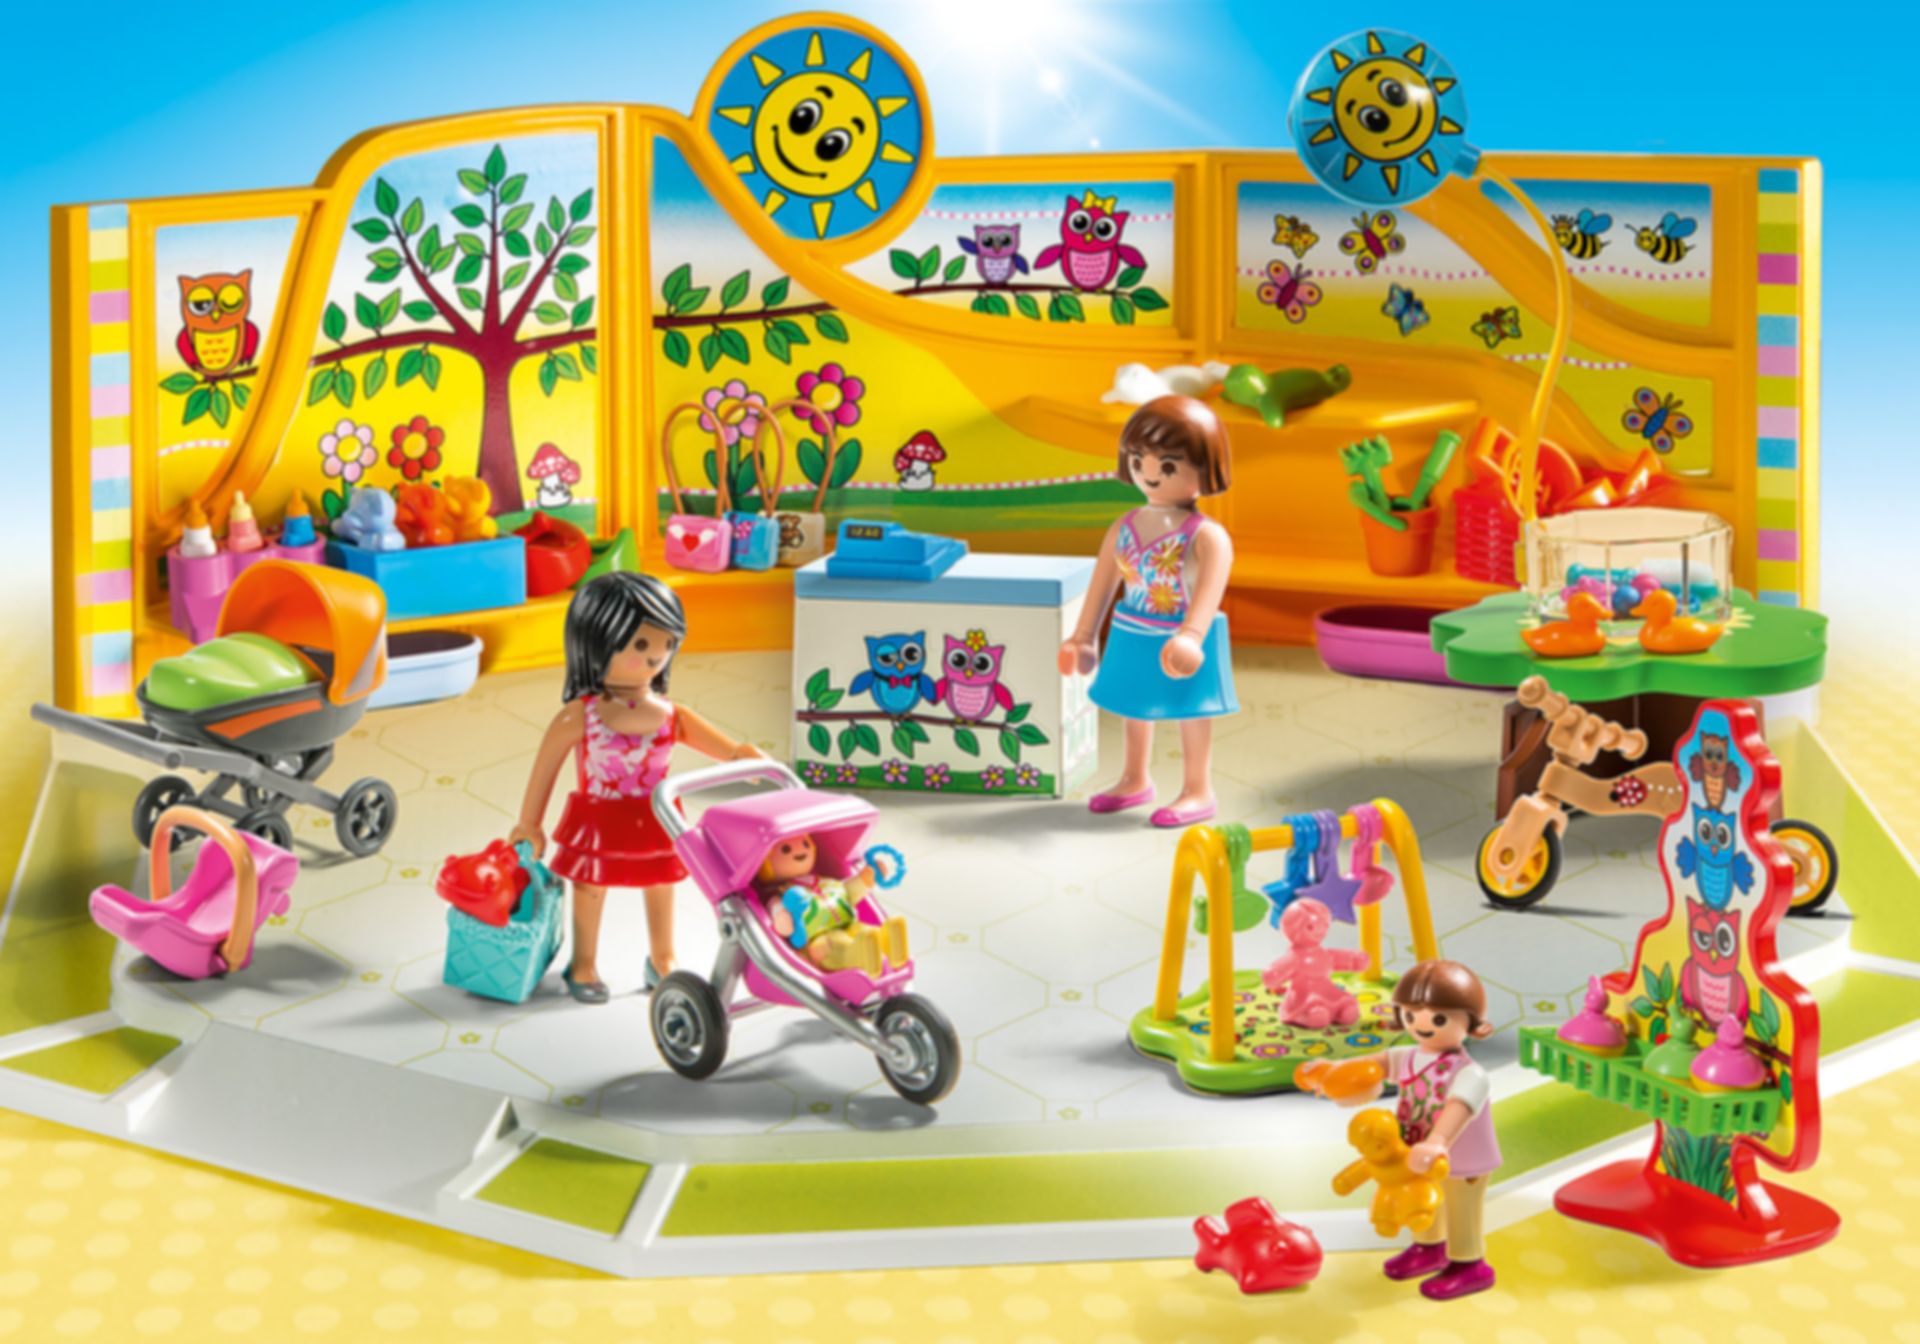 Biprodukt beskydning chokolade The best prices today for Playmobil® City Life Baby Store - PlaymoFinder